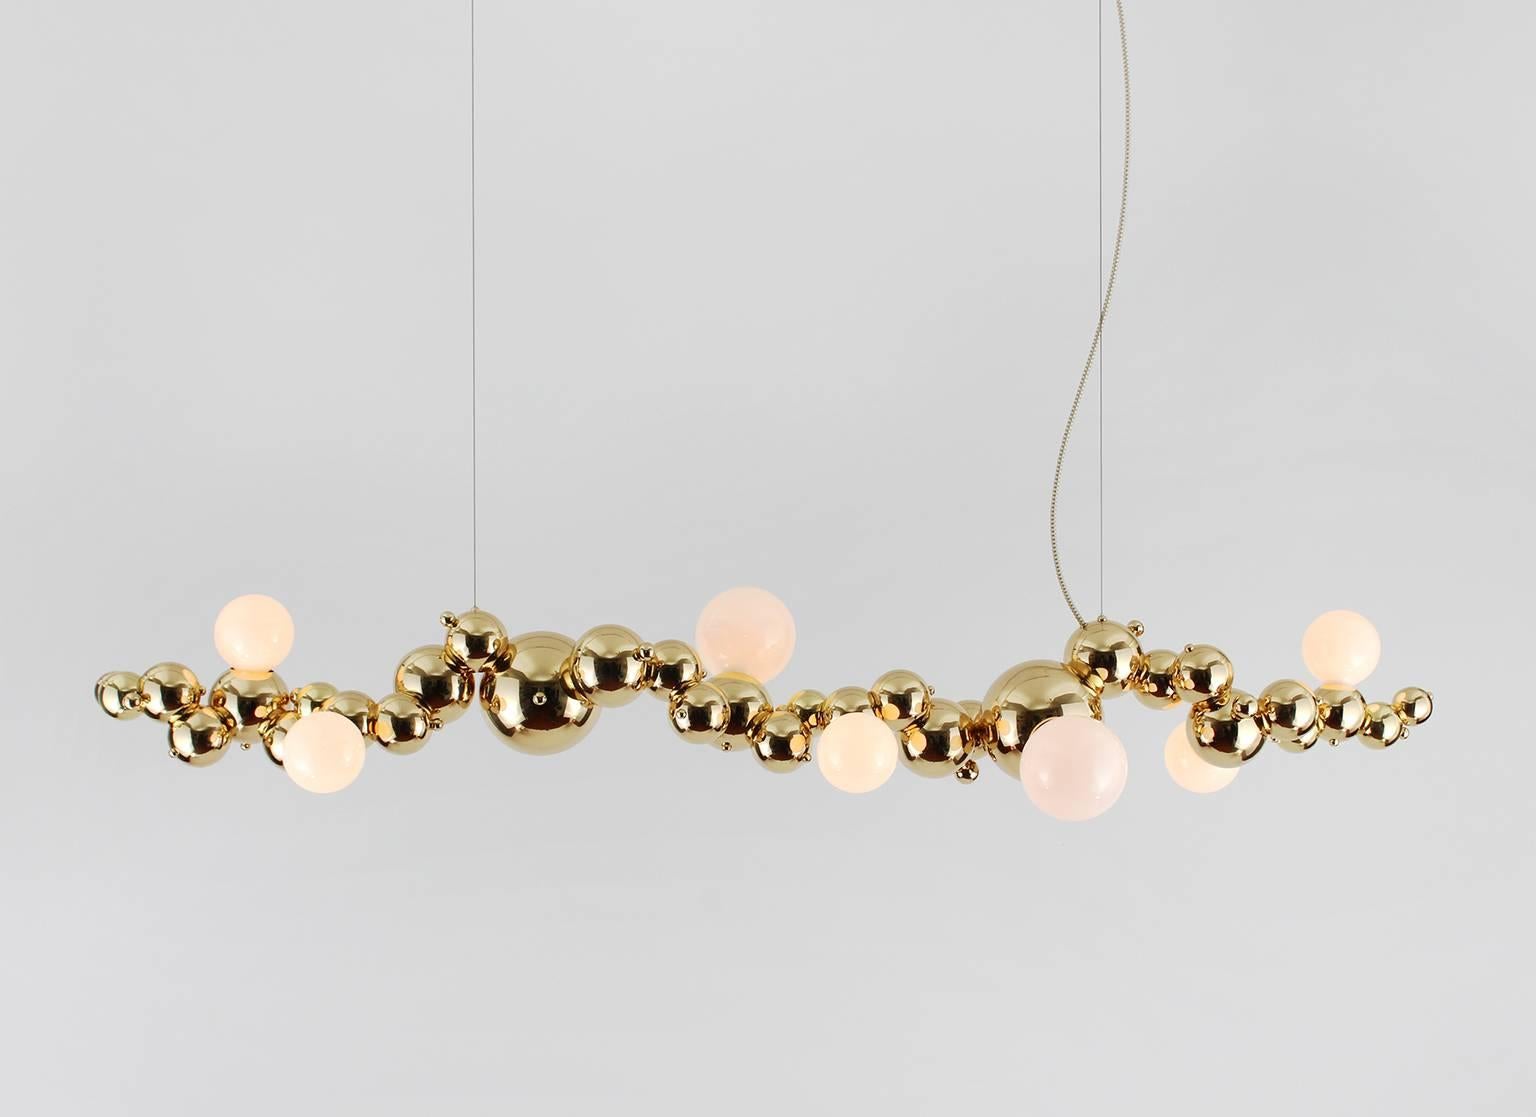 Bubbly is an effervescent all-brass lighting system inspired by soap bubble clusters and Newton's laws of universal gravitation. The modular system comprises discrete brass spheres, meticulously assembled to form abstract organic fixtures